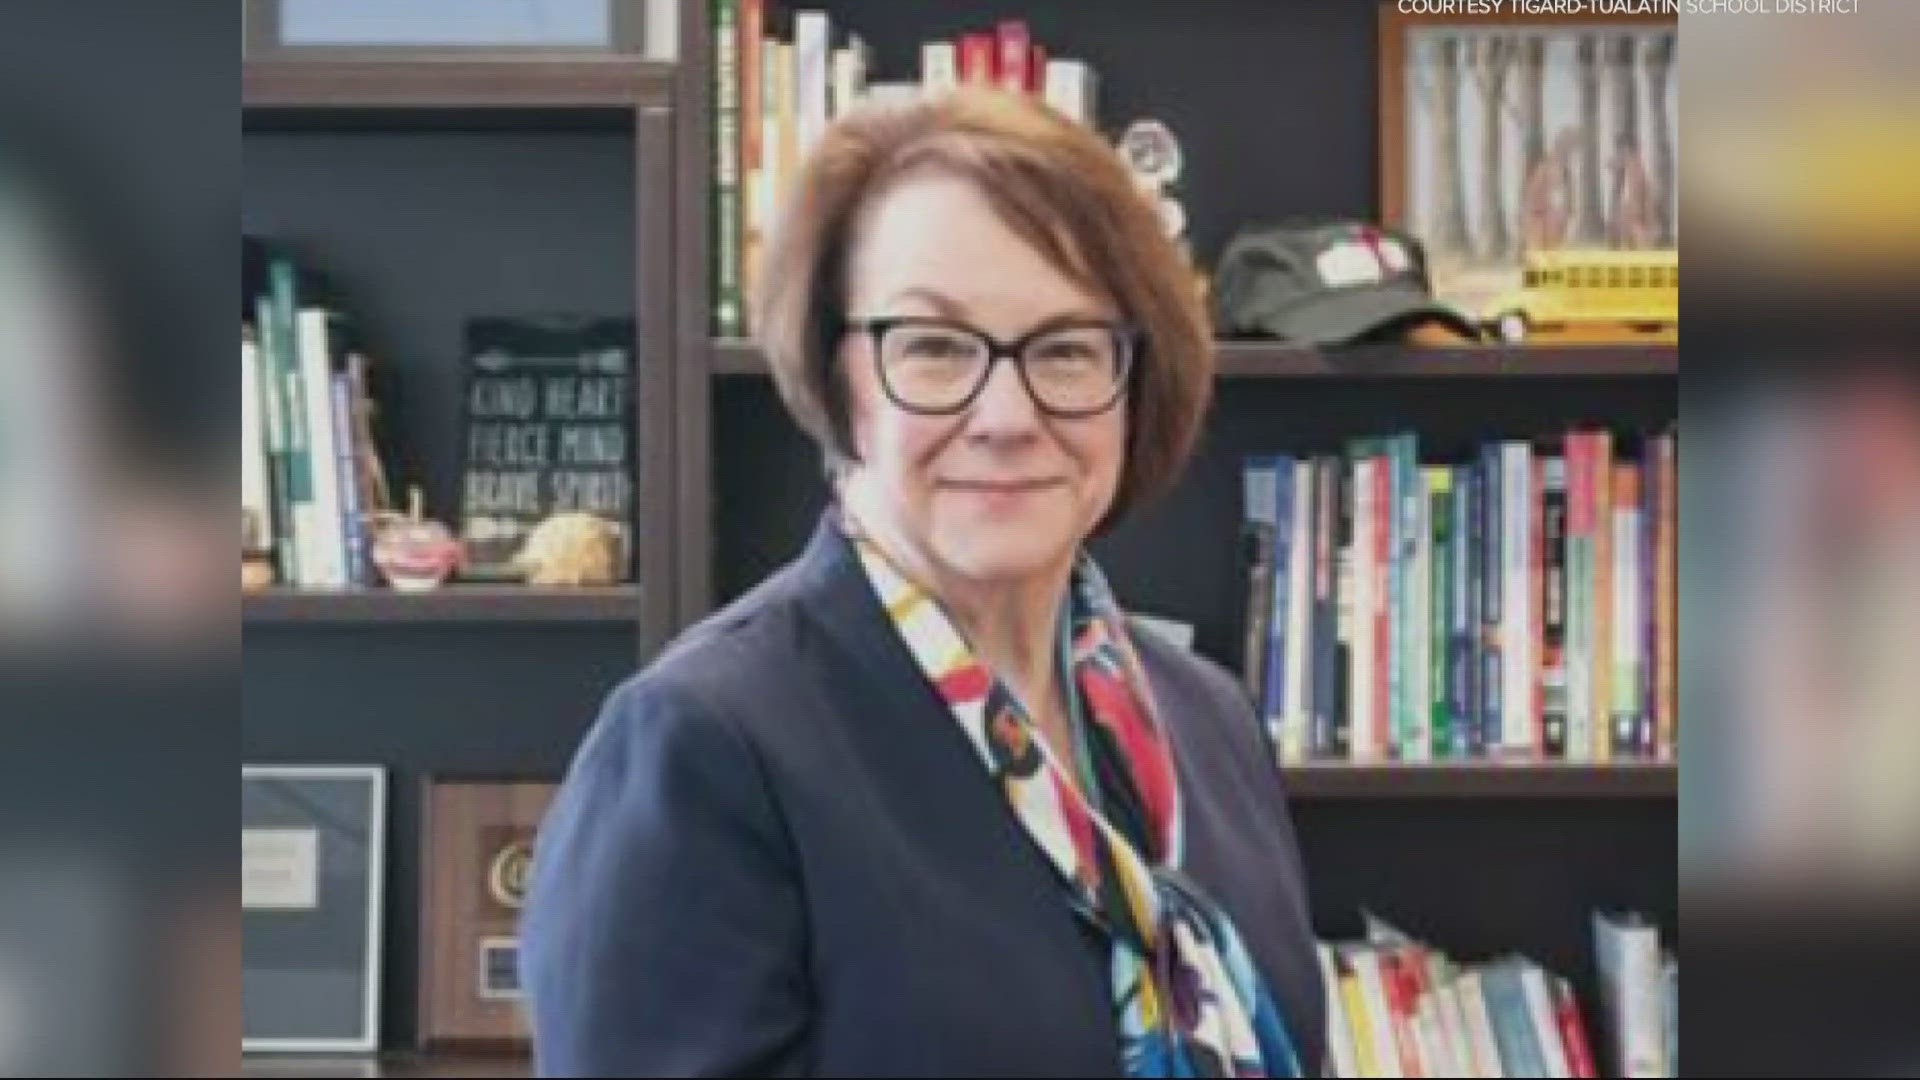 Over the past year, threats of school shootings and violence have troubled the district. Superintendent Dr. Sue Rieke Smith’s last day will be June 30th.